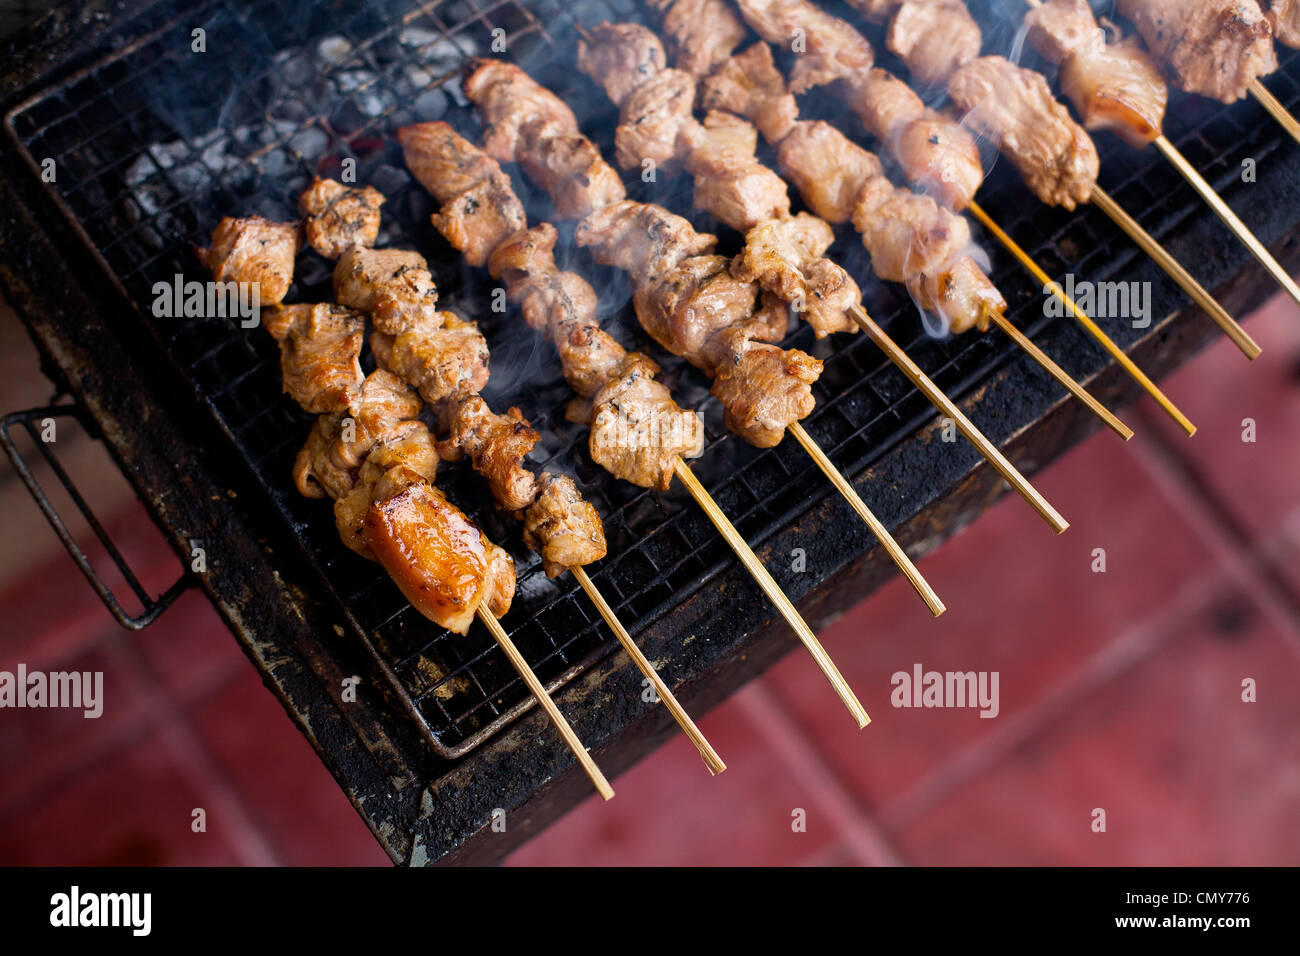 Pork skewers grill over charcoal at a barbeque in Antipolo, Rizal Province, Philippine Islands. Stock Photo